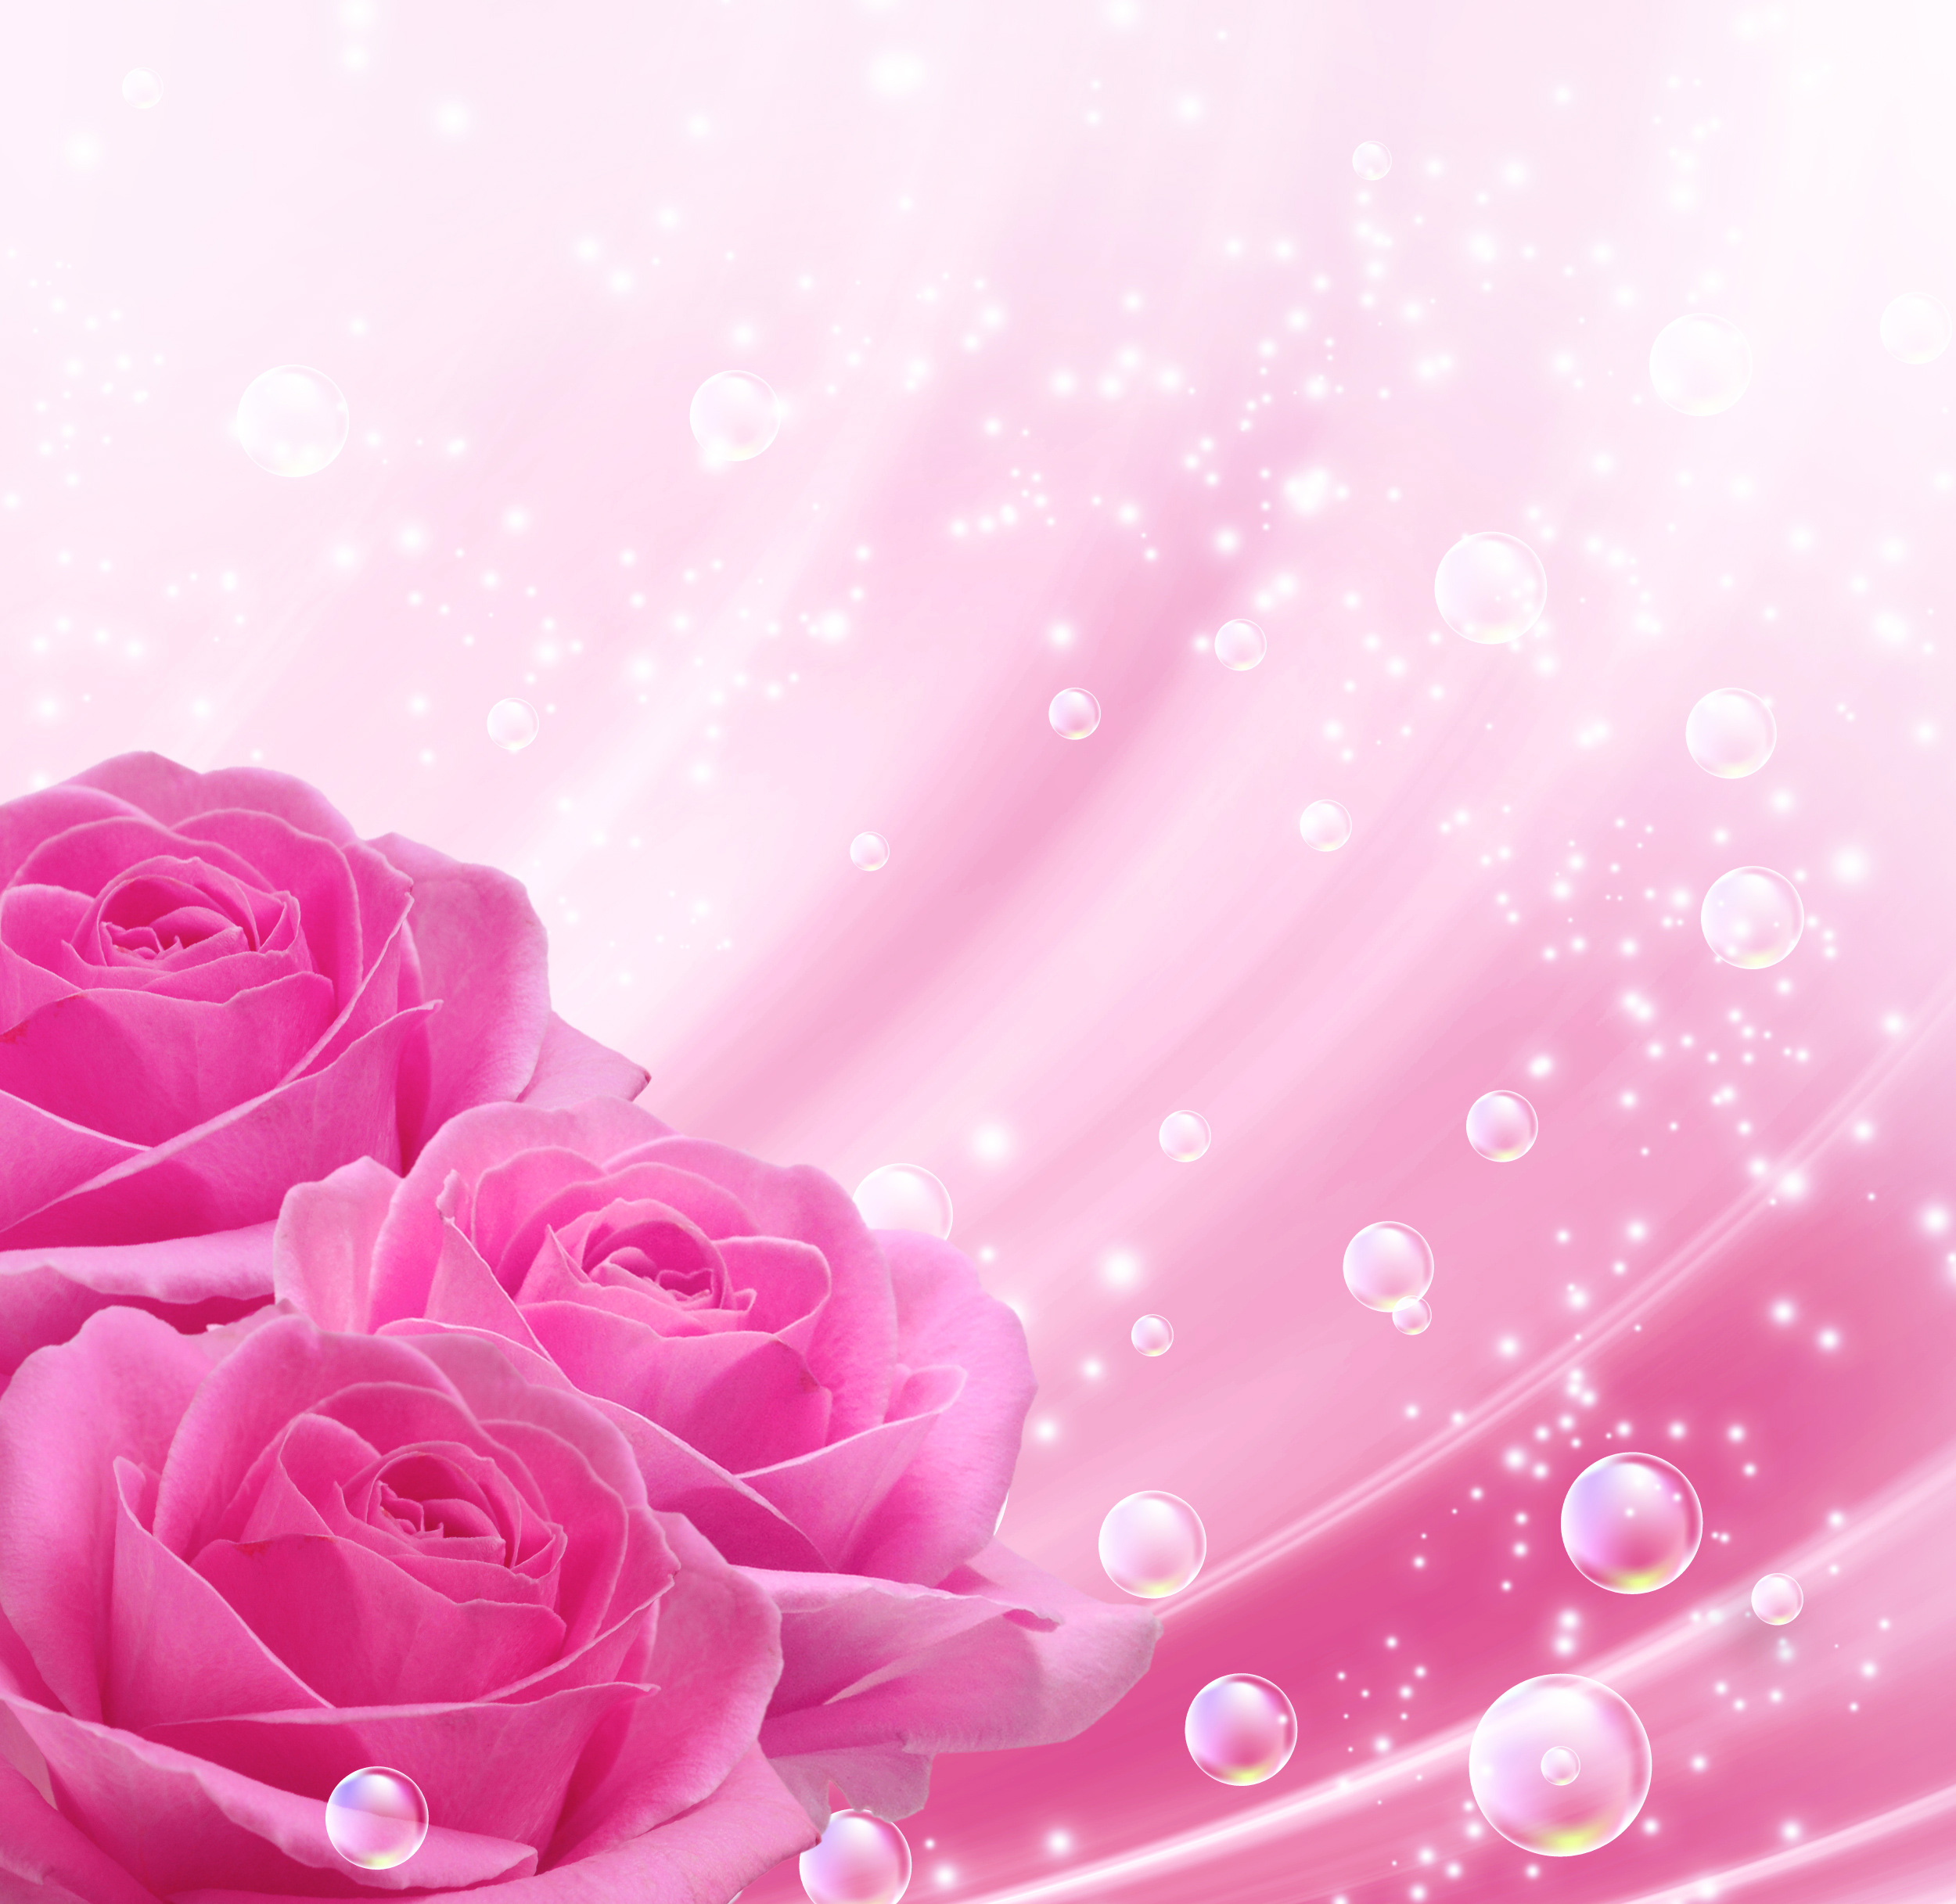 Pink Background with Pink Rosesm1399676400